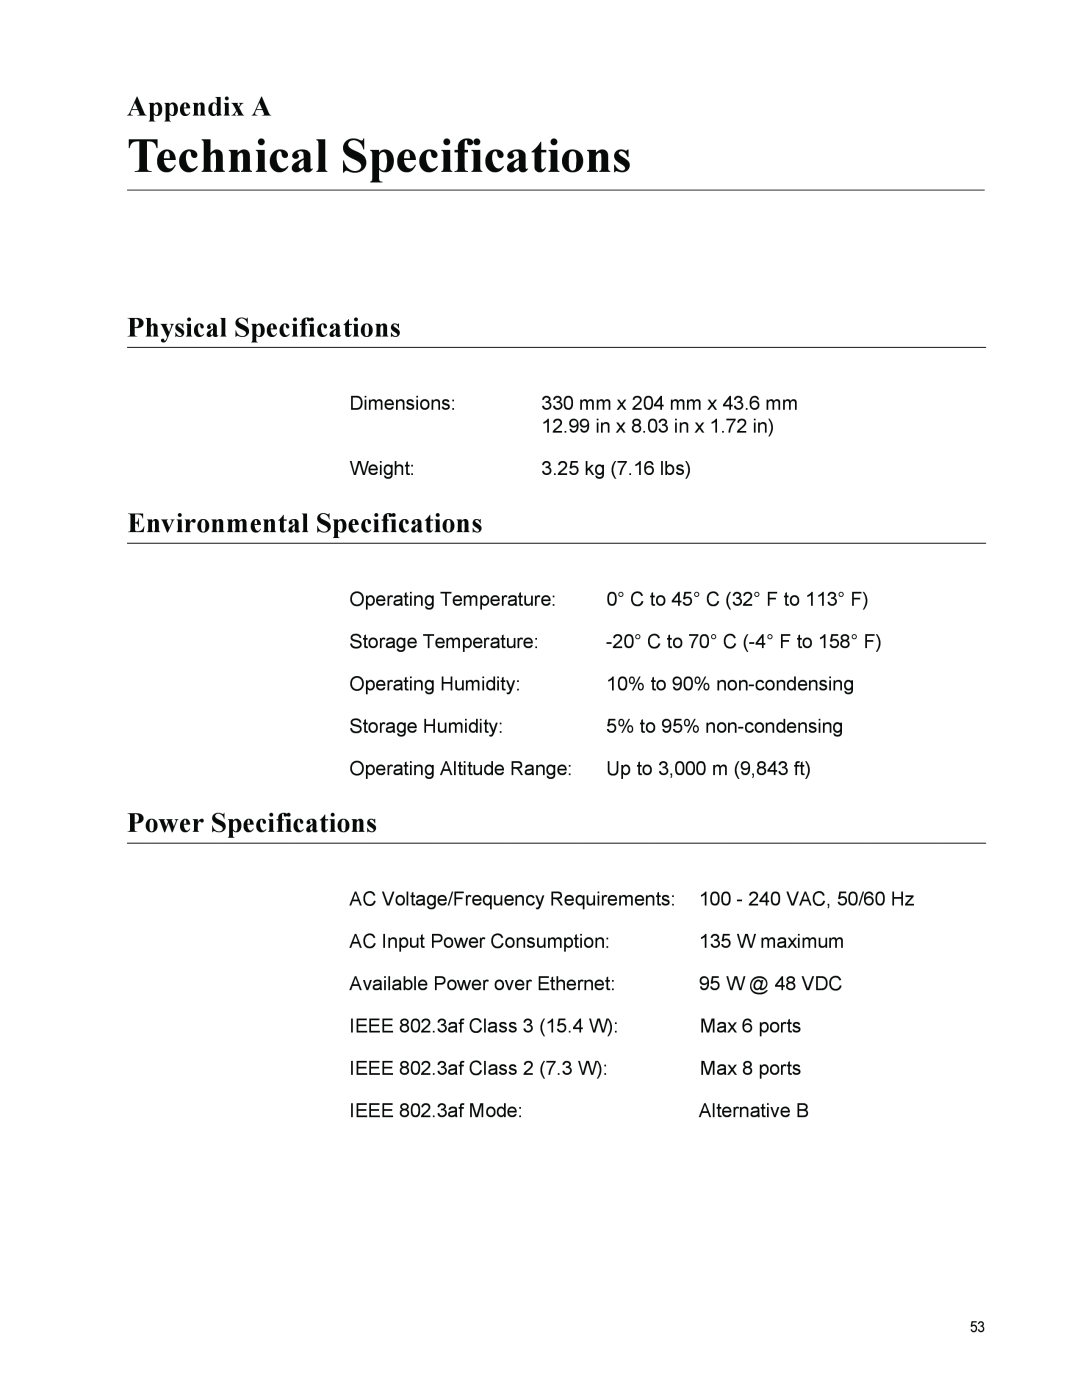 Allied Telesis 8000/8POE manual Technical Specifications, Appendix A, Physical Specifications, Environmental Specifications 